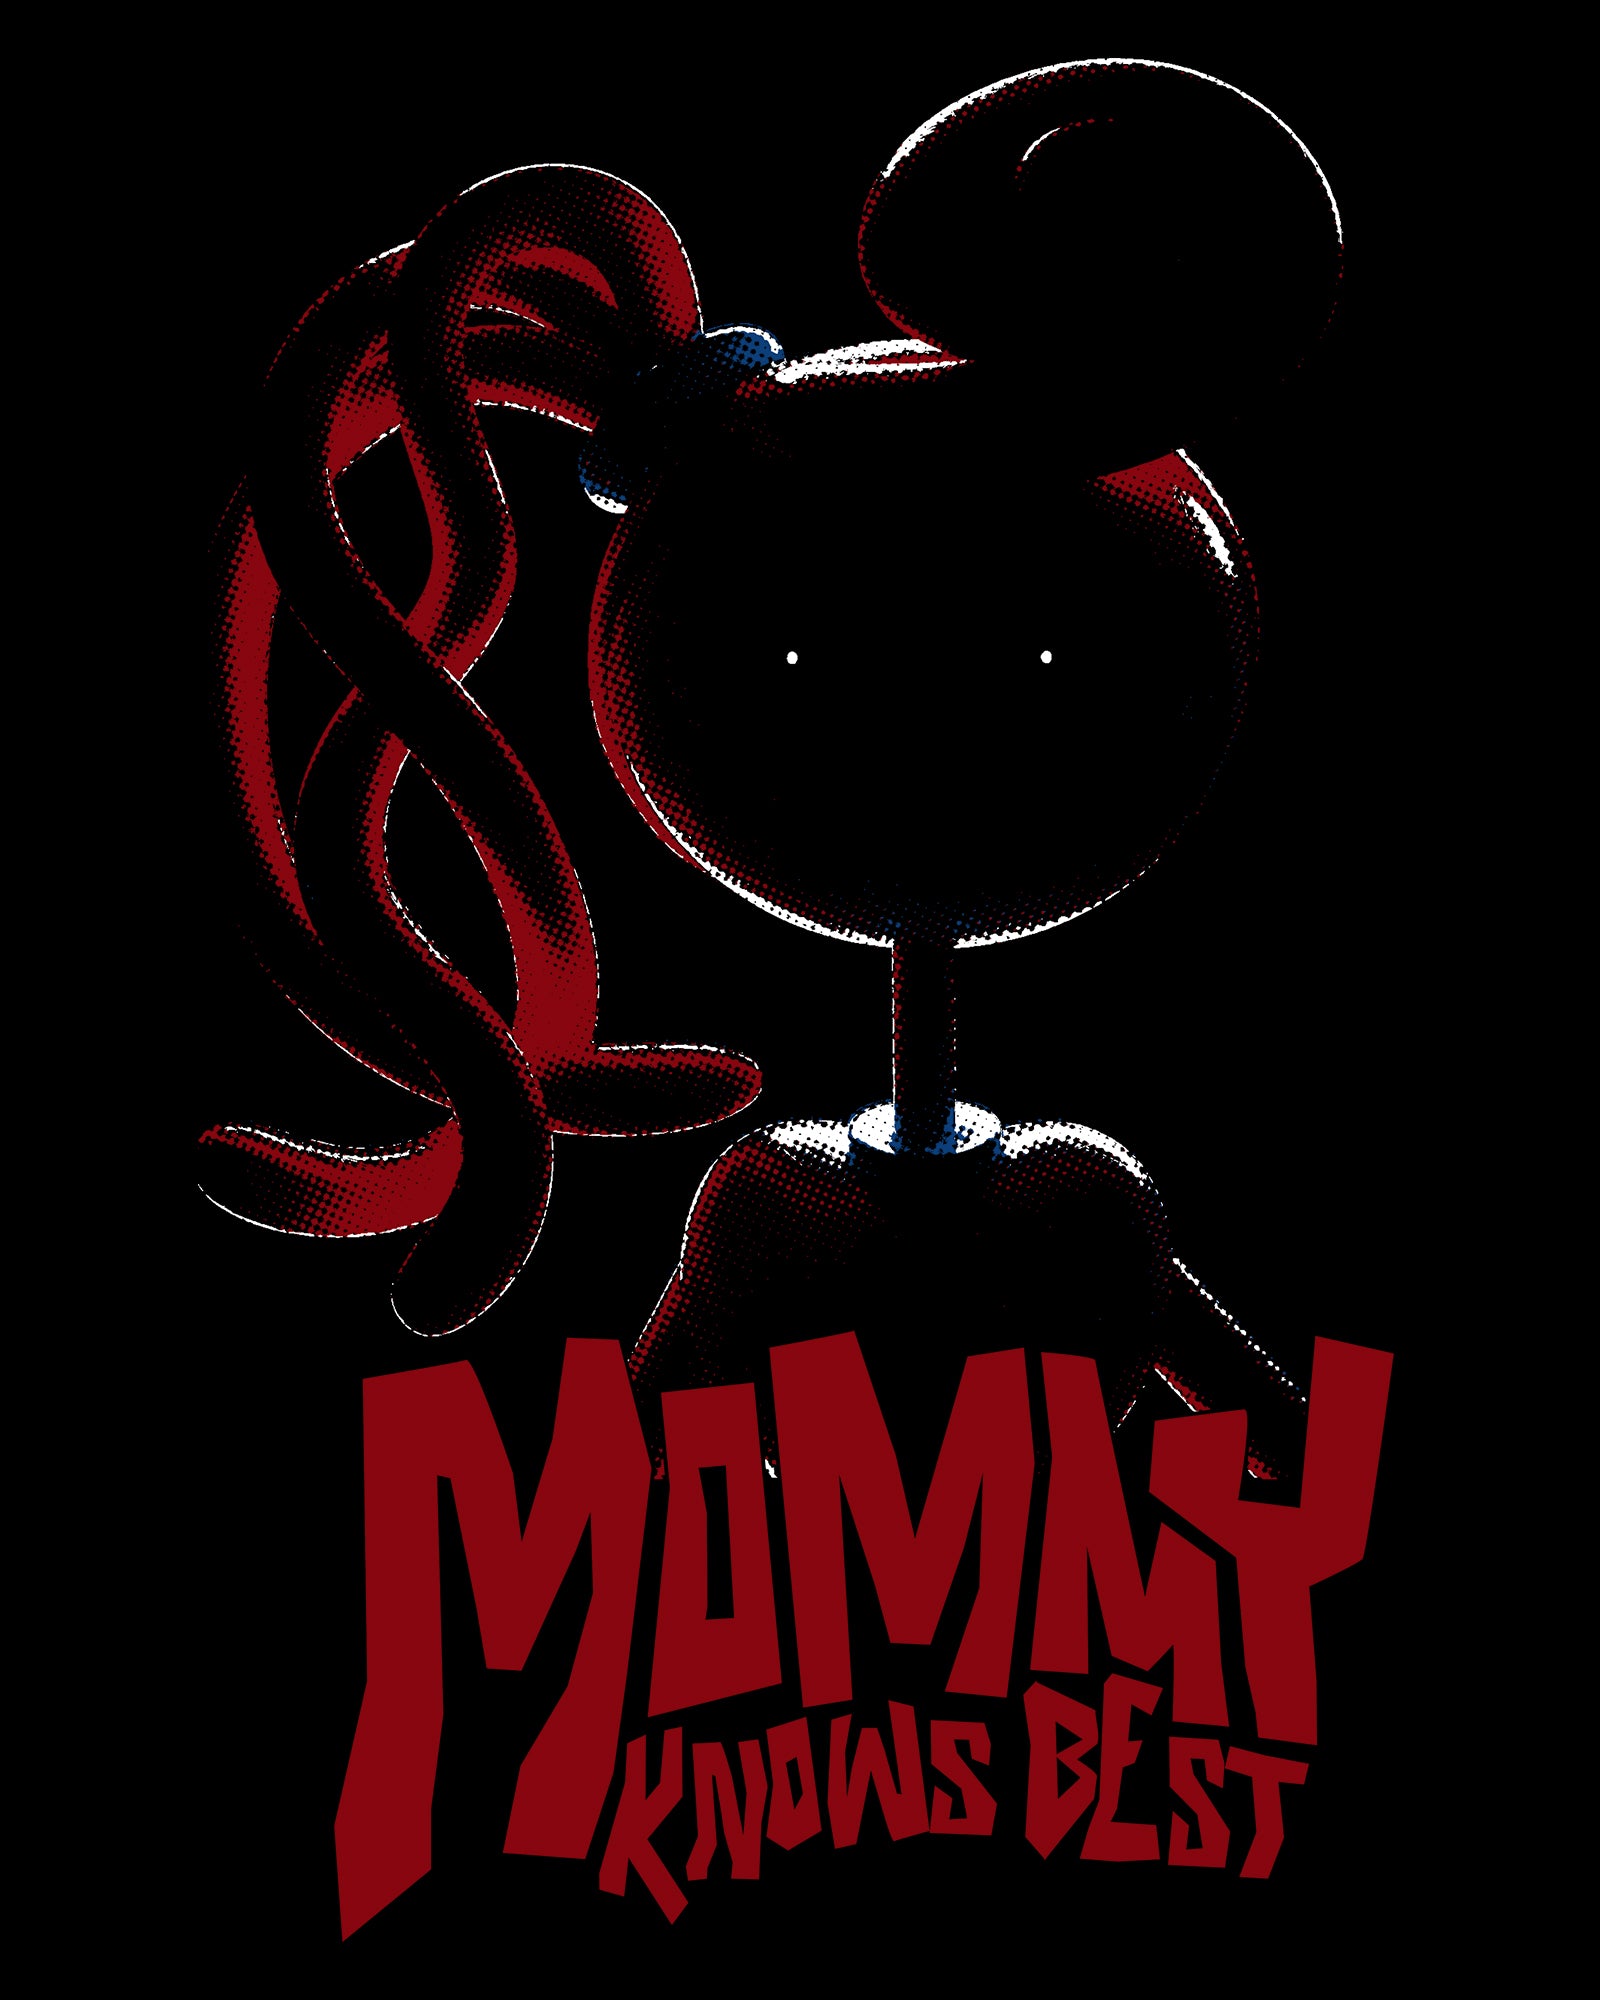 image on shirt: mommy long legs darkened, except for eyes. text: mommy knows best